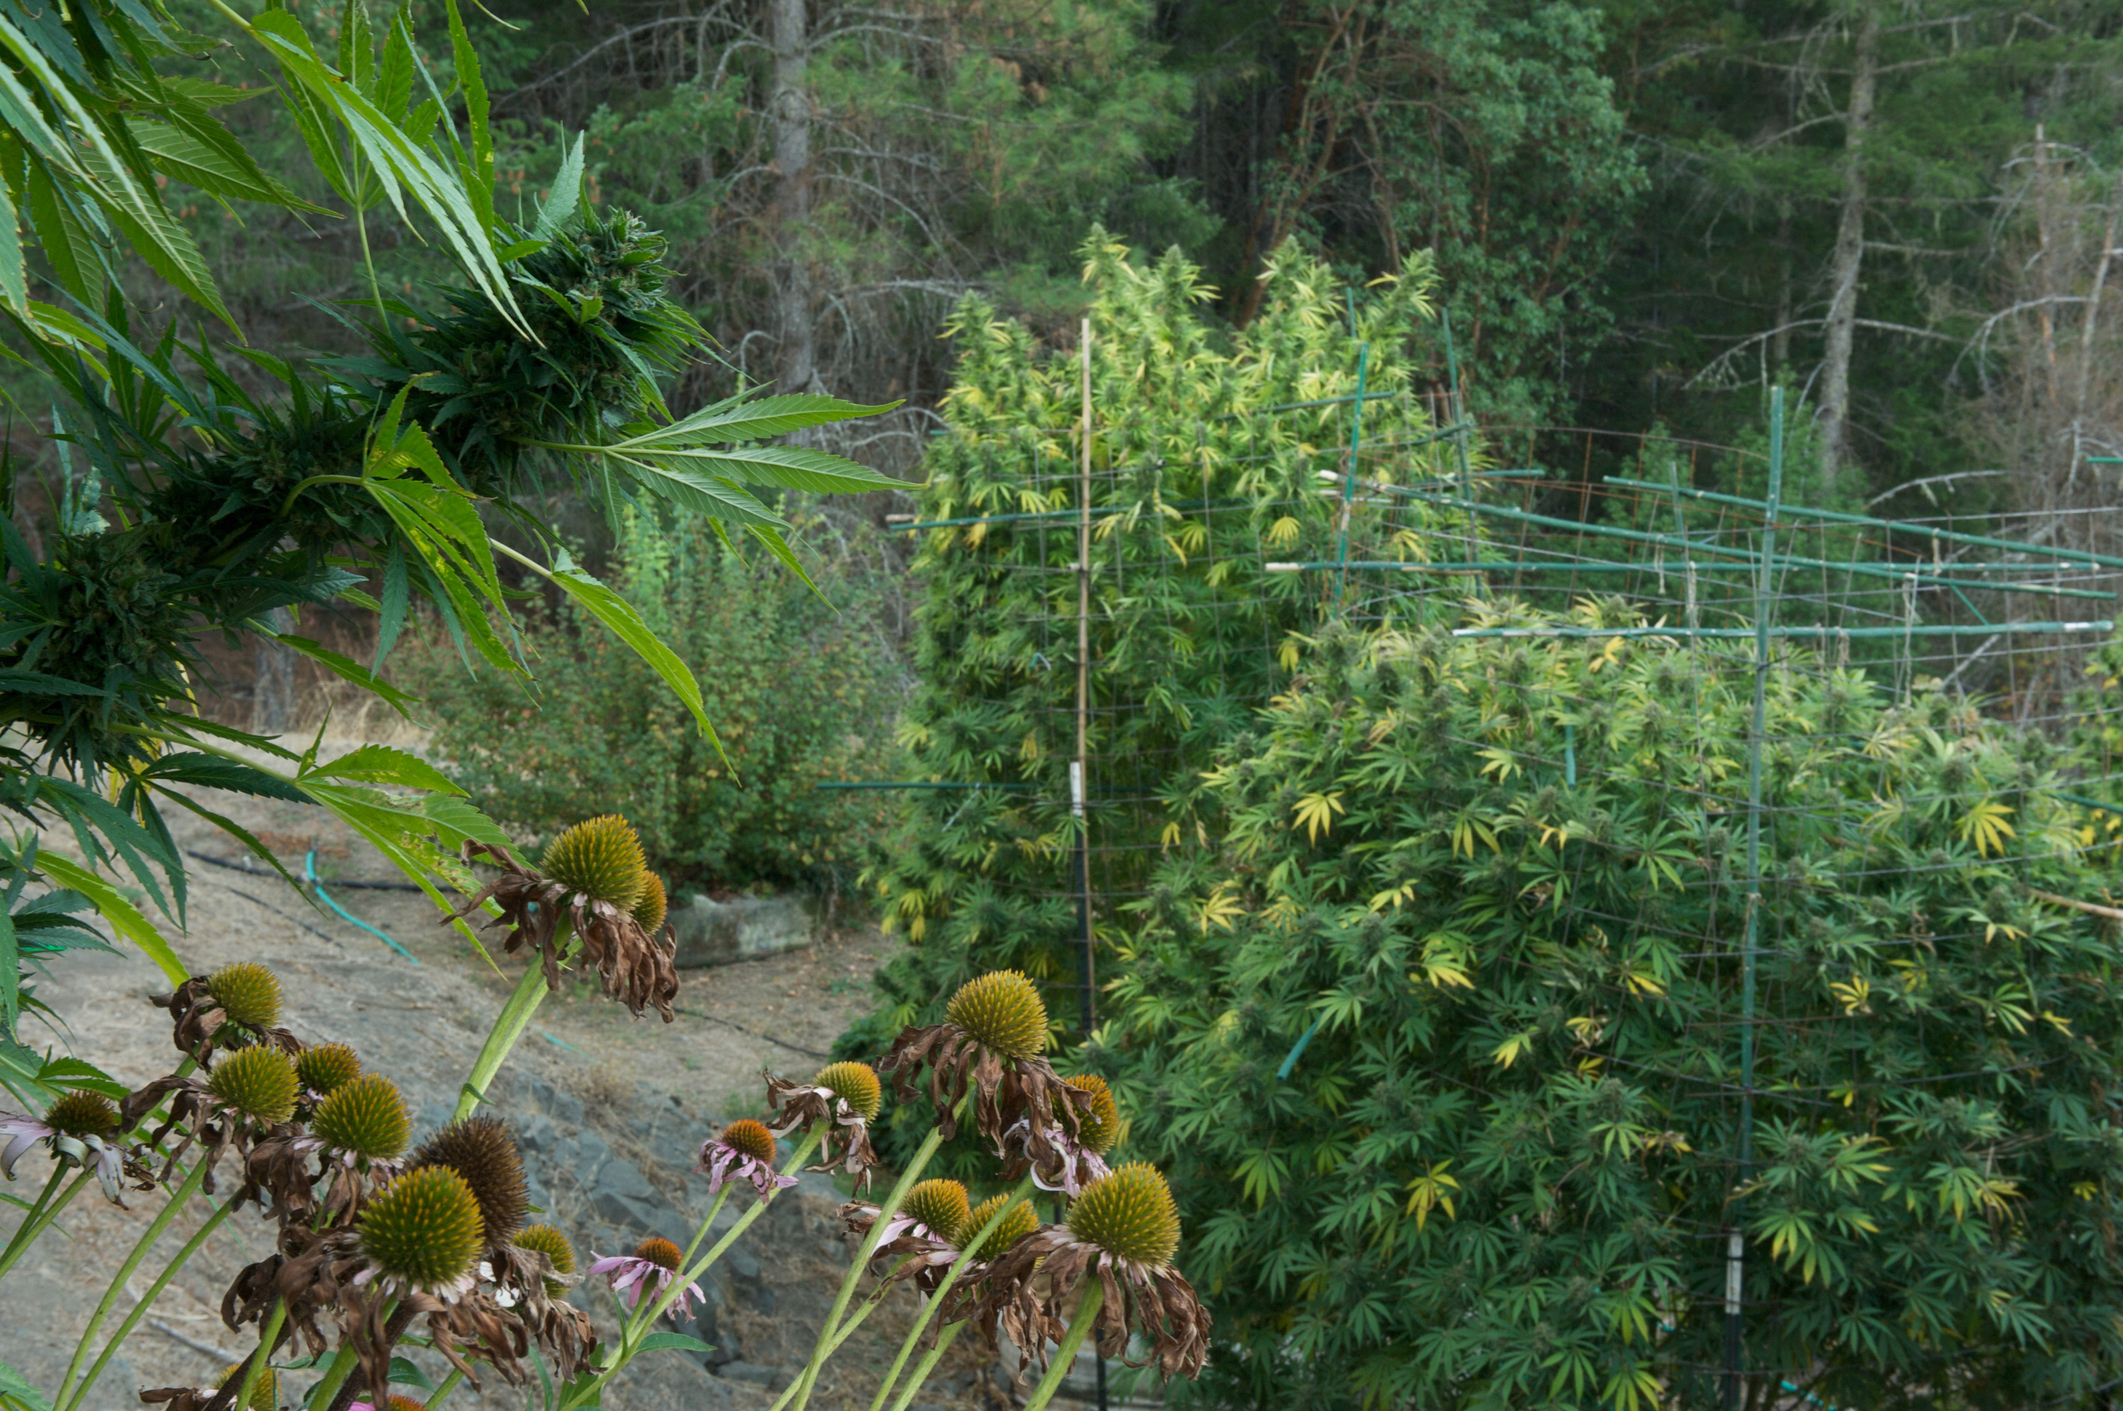 View of various plants including cone-shaped flowers and a bamboo structure against a backdrop of trees